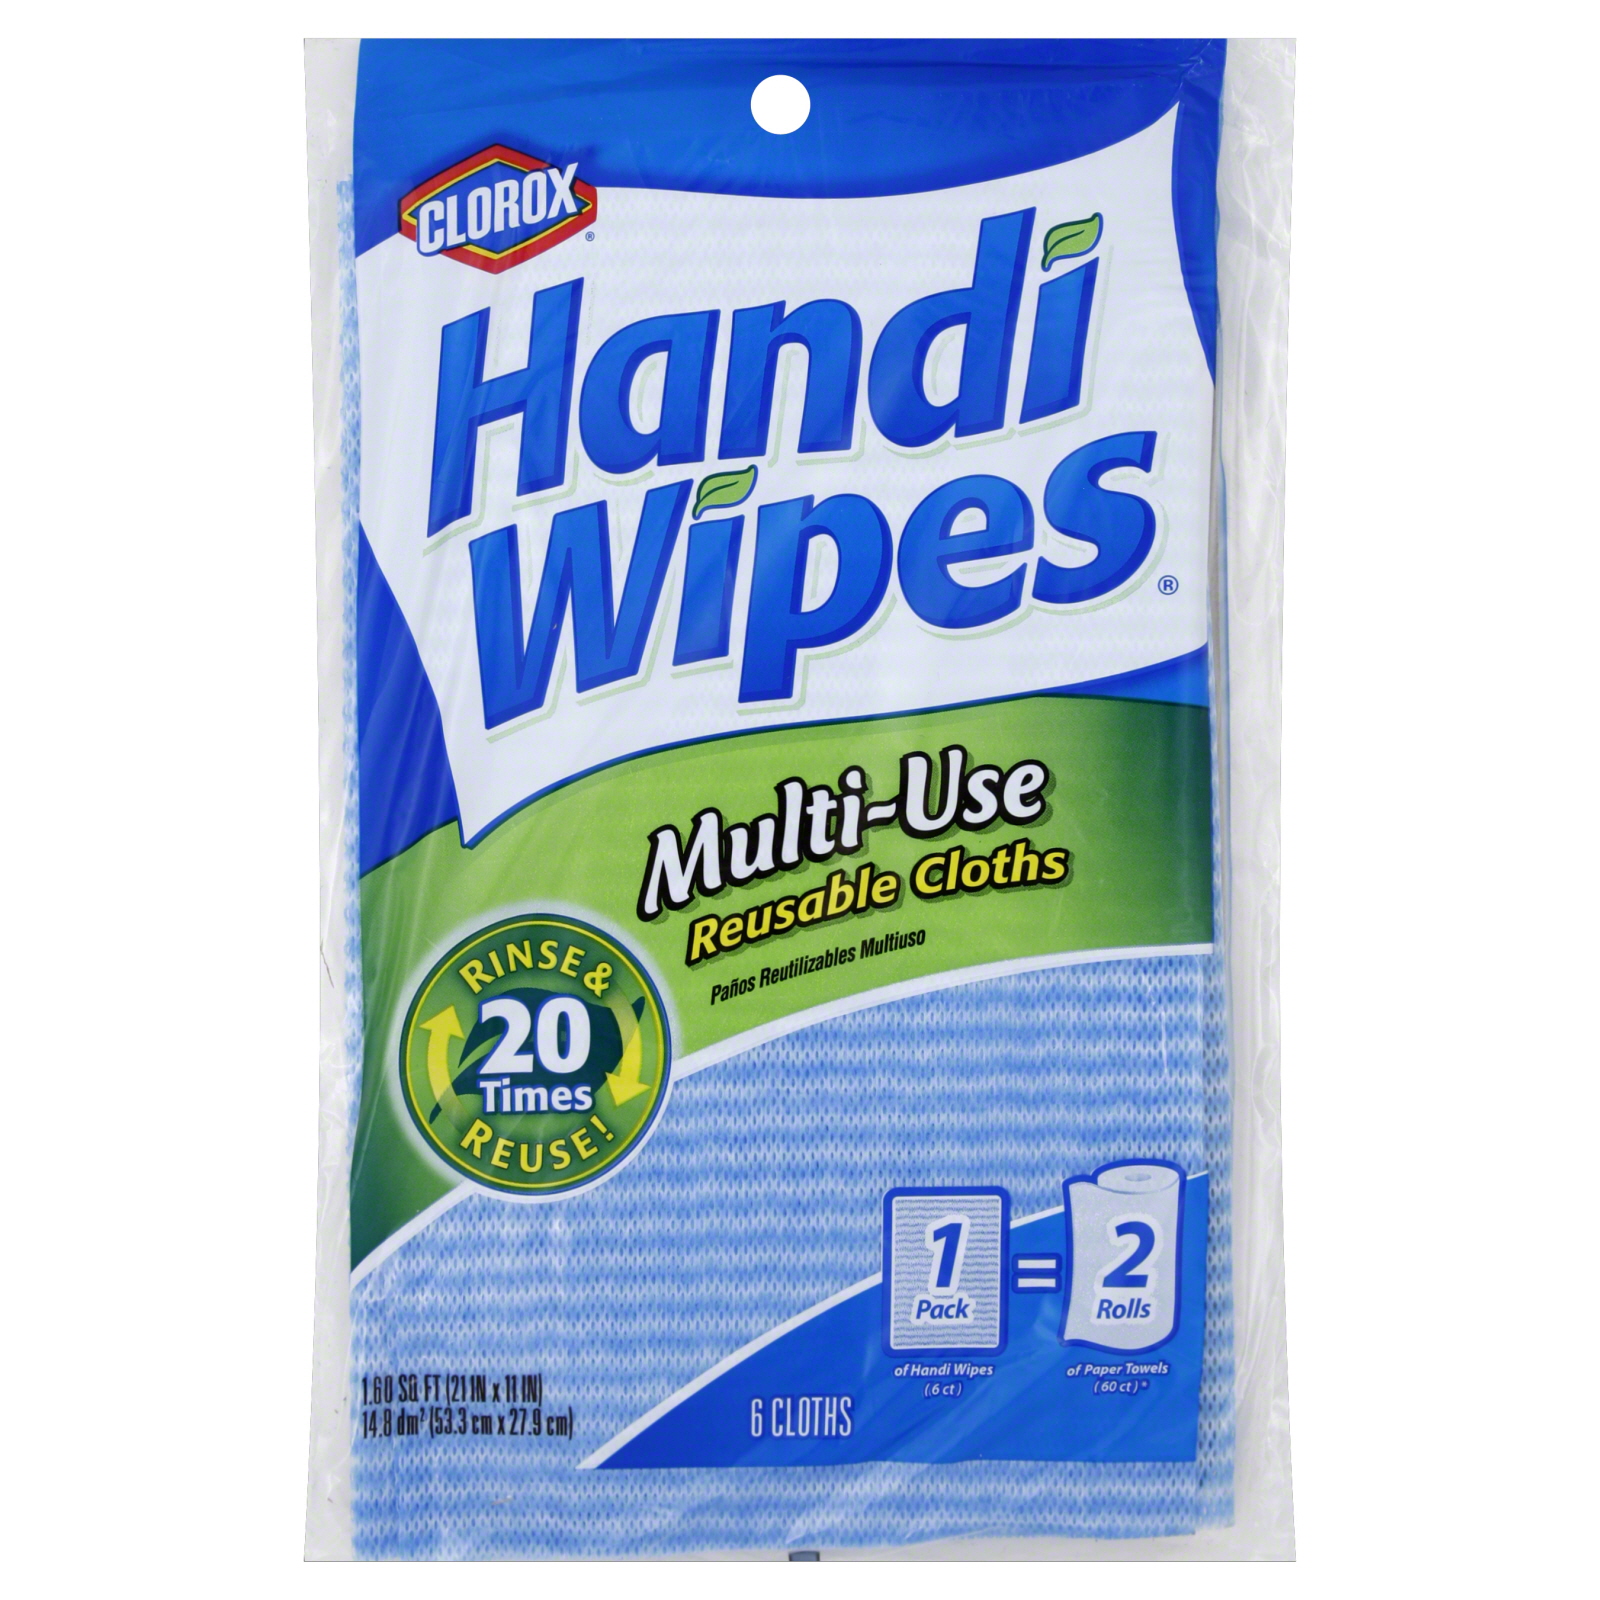 Handi Wipes Reusable Cloths, Extra Large, 2 x 11 In, 6 cloths